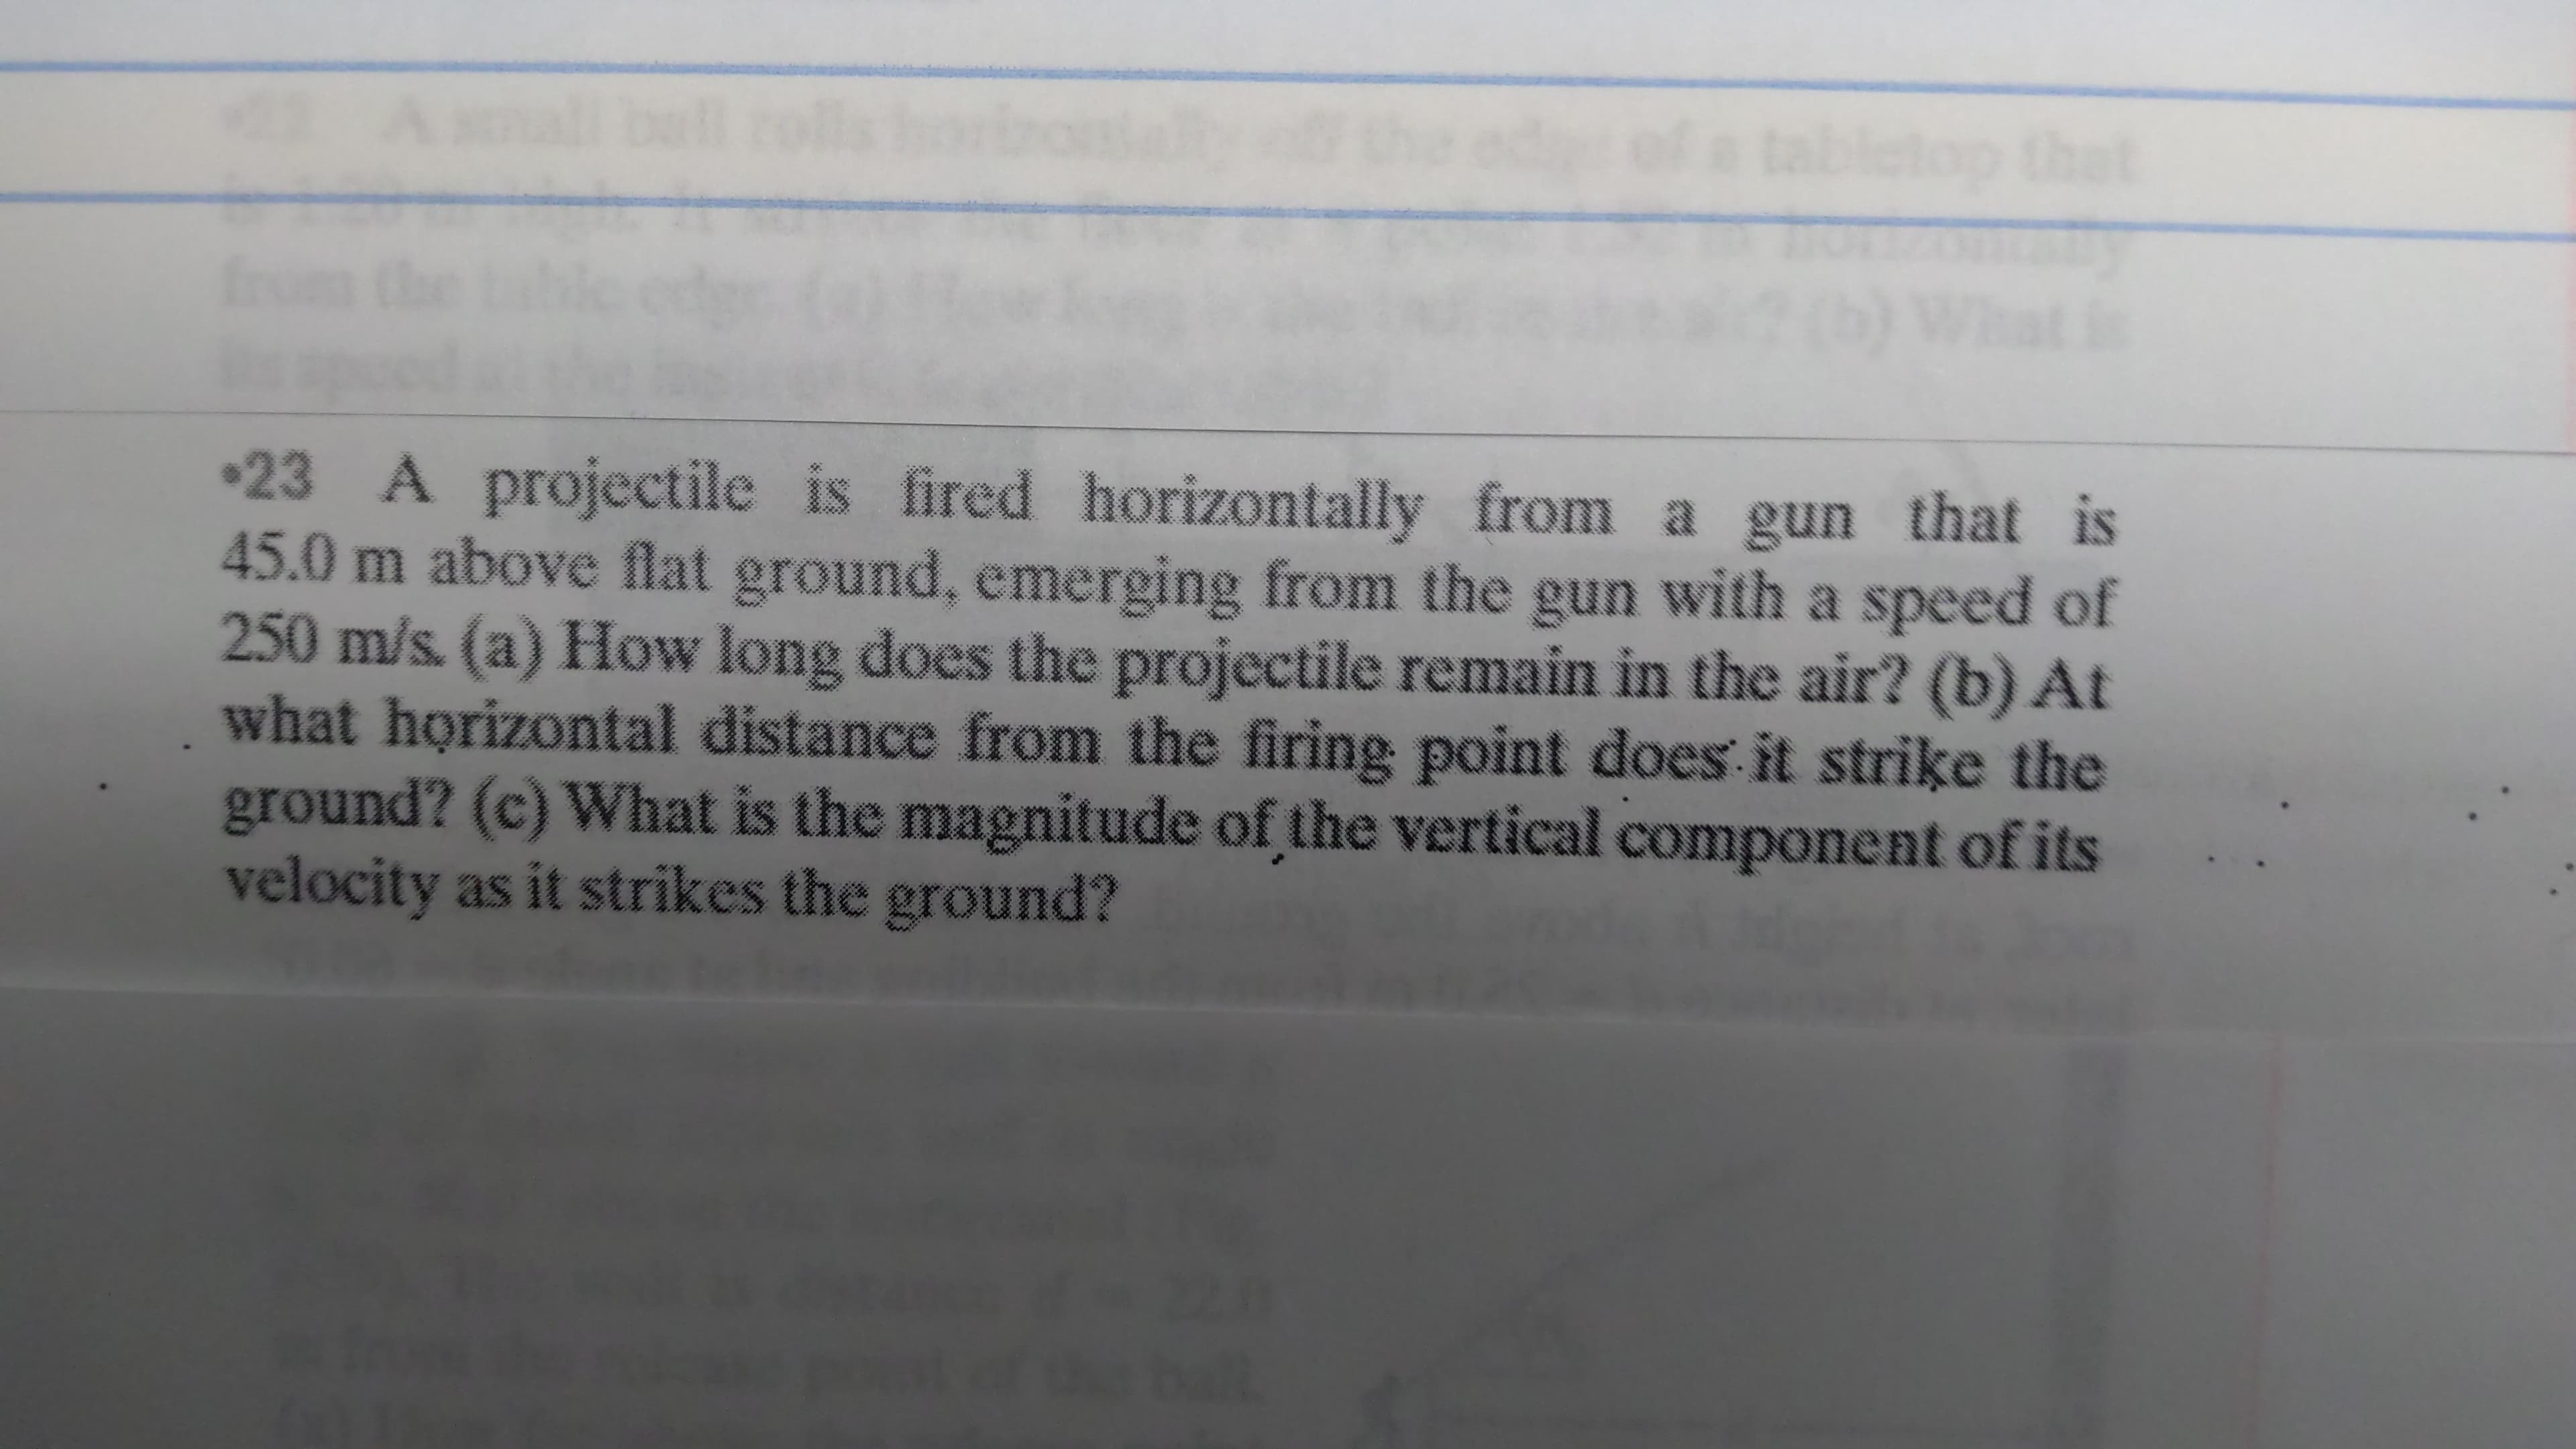 top that
23 A projectile is fired horizontally from a gun that is
45.0 m above flat ground, emerging from the gun with a speed of
250 m/s. (a) How long does the projectile remain in the air? (b) At
what horizontal distance from the firing point does it strike the
ground? (c) What is the magnitude of the vertical component of its
velocity as it strikes the ground?
20
